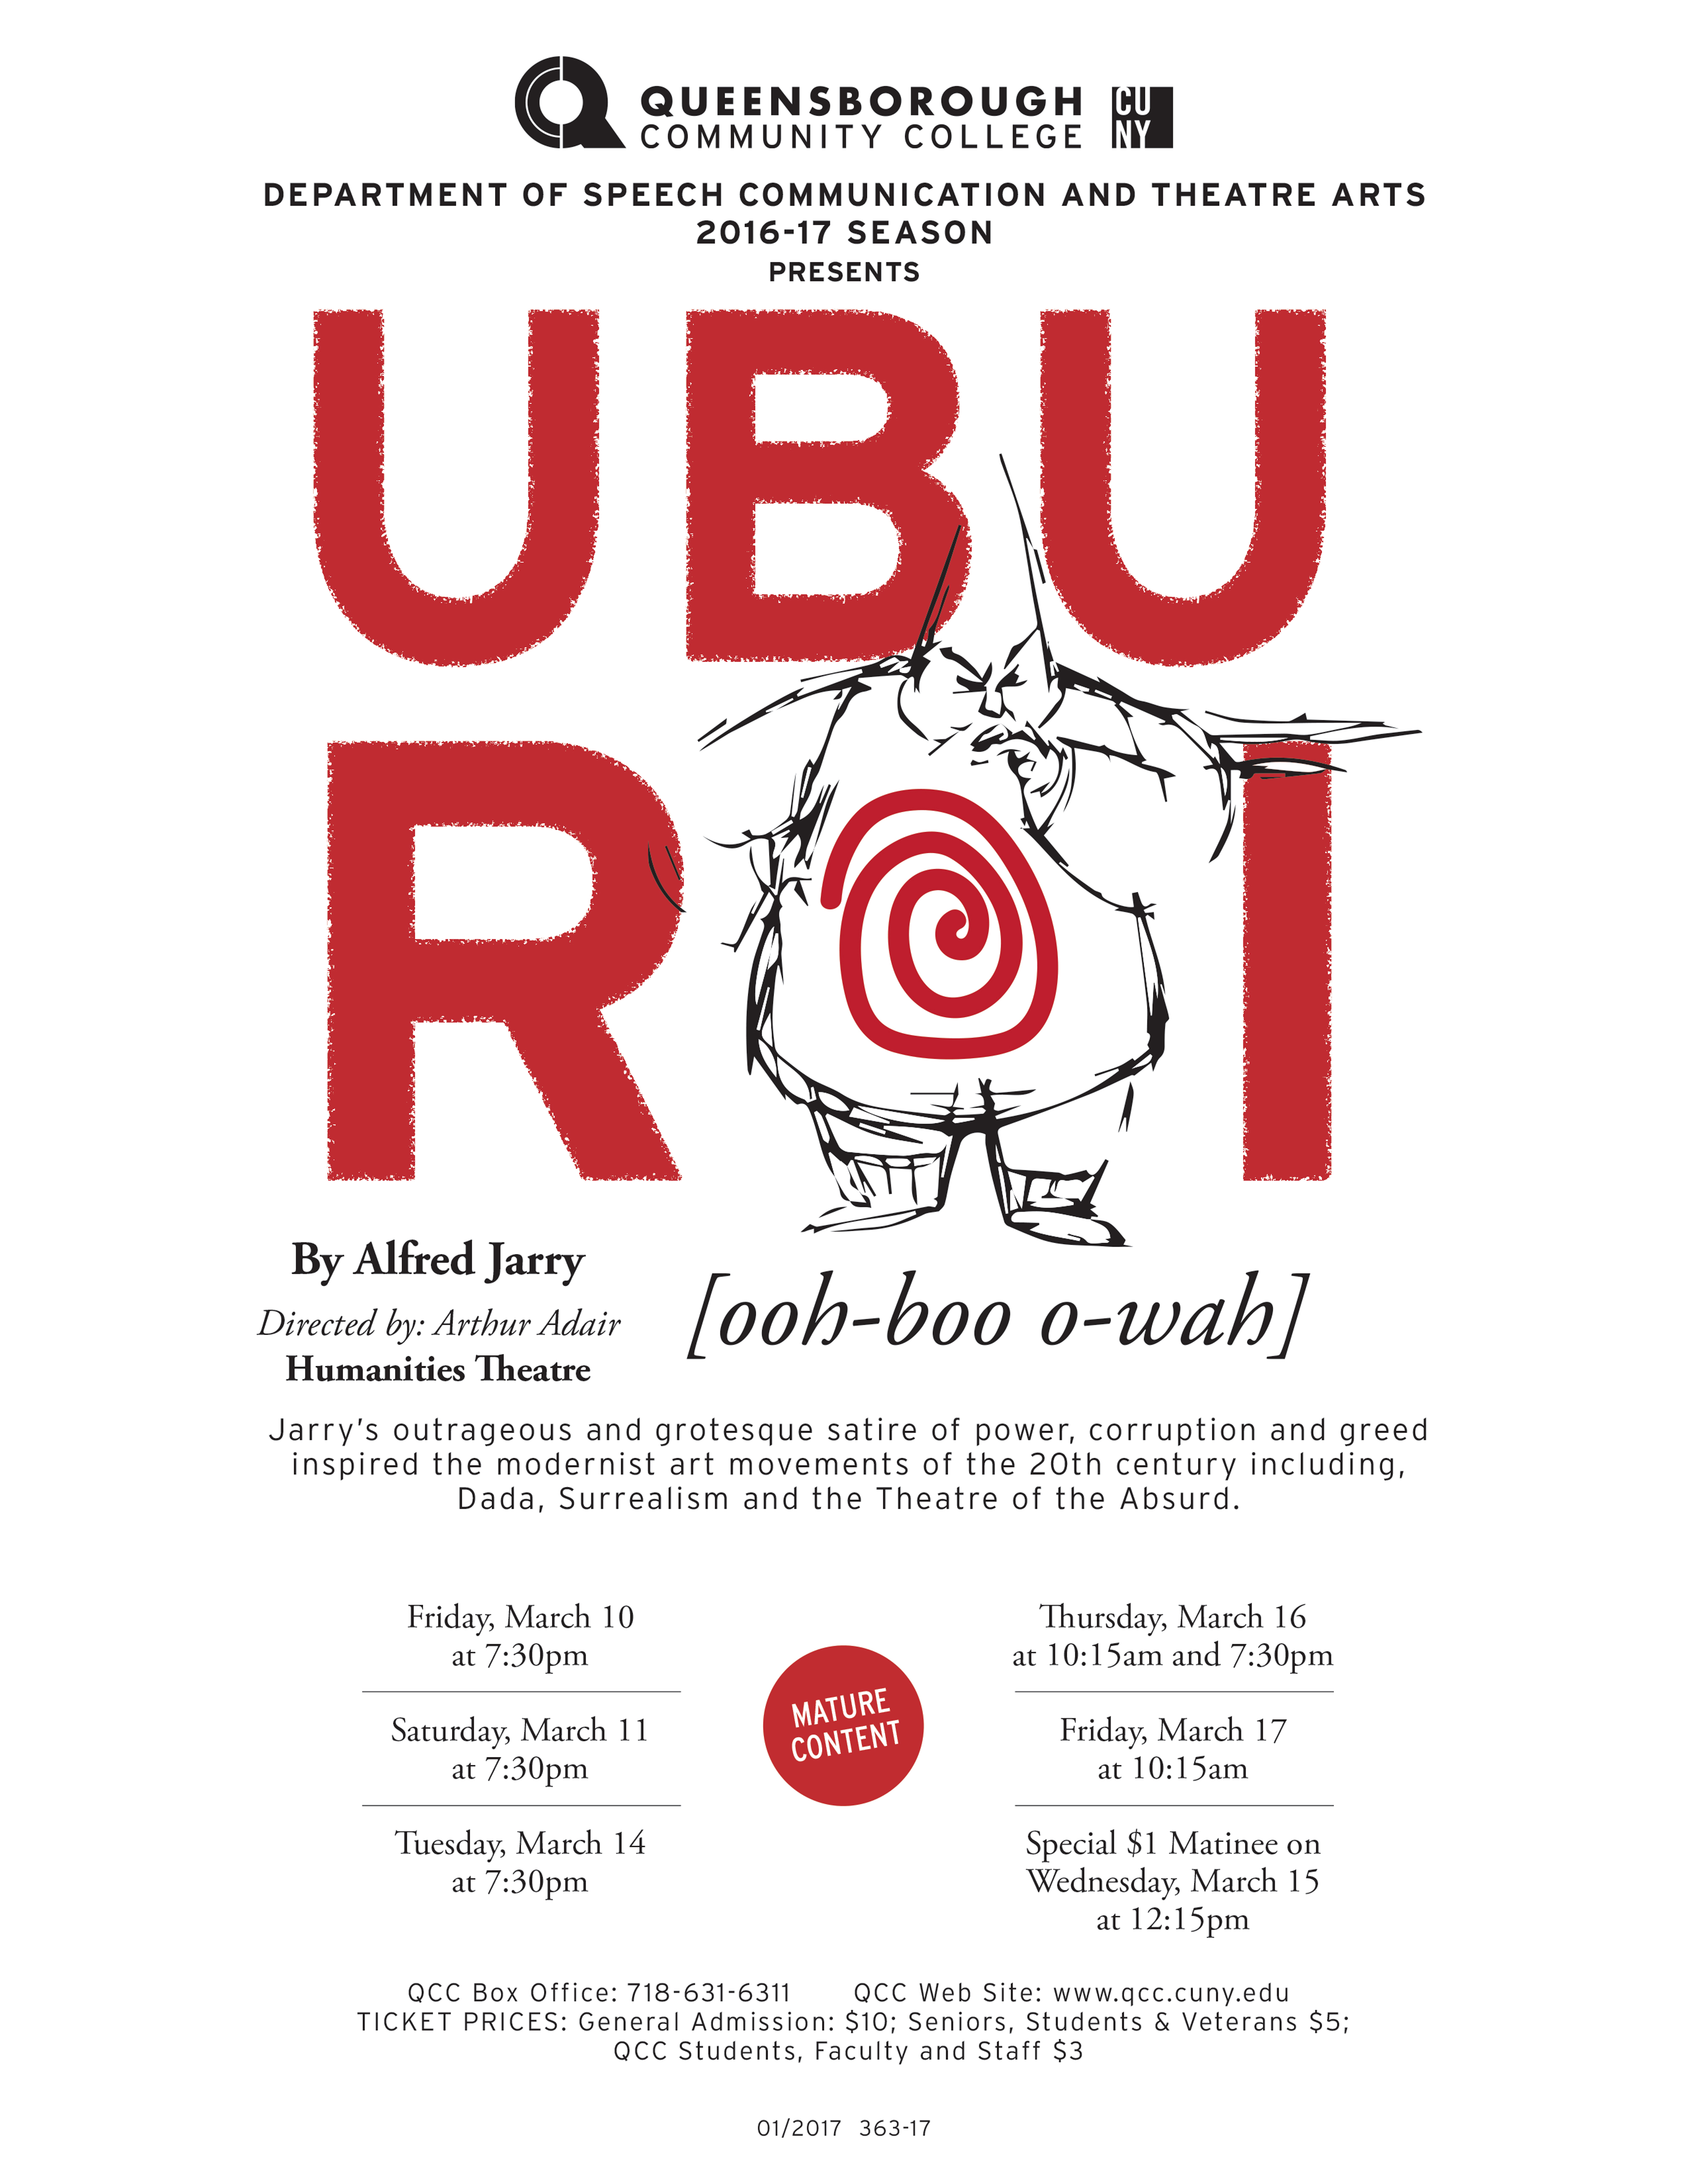 This is a poster for the past spring 2017 production of ‘Ubu Roi’, written by Alfred Jarry, and adapted and directed by Professor Adair. The poster displays a large clown and a spiral on its belly.